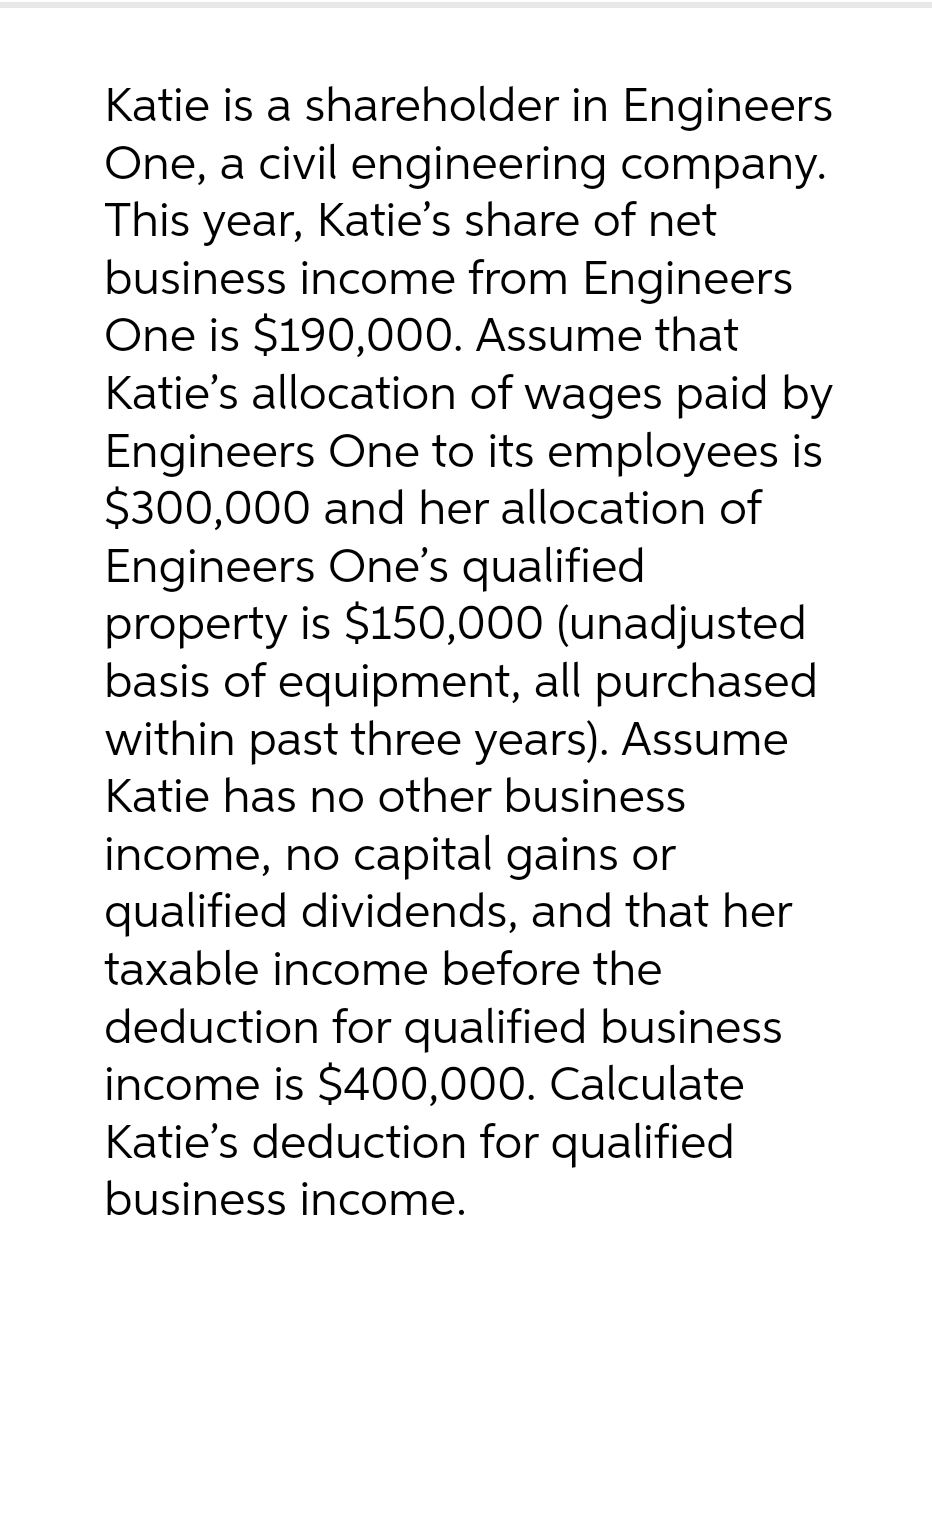 company.
Katie is a shareholder in Engineers
One, a civil engineering
This year, Katie's share of net
business income from Engineers
One is $190,000. Assume that
Katie's allocation of wages paid by
Engineers One to its employees is
$300,000 and her allocation of
Engineers One's qualified
property is $150,000 (unadjusted
basis of equipment, all purchased
within past three years). Assume
Katie has no other business
income, no capital gains or
qualified dividends, and that her
taxable income before the
deduction for qualified business
income is $400,000. Calculate
Katie's deduction for qualified
business income.